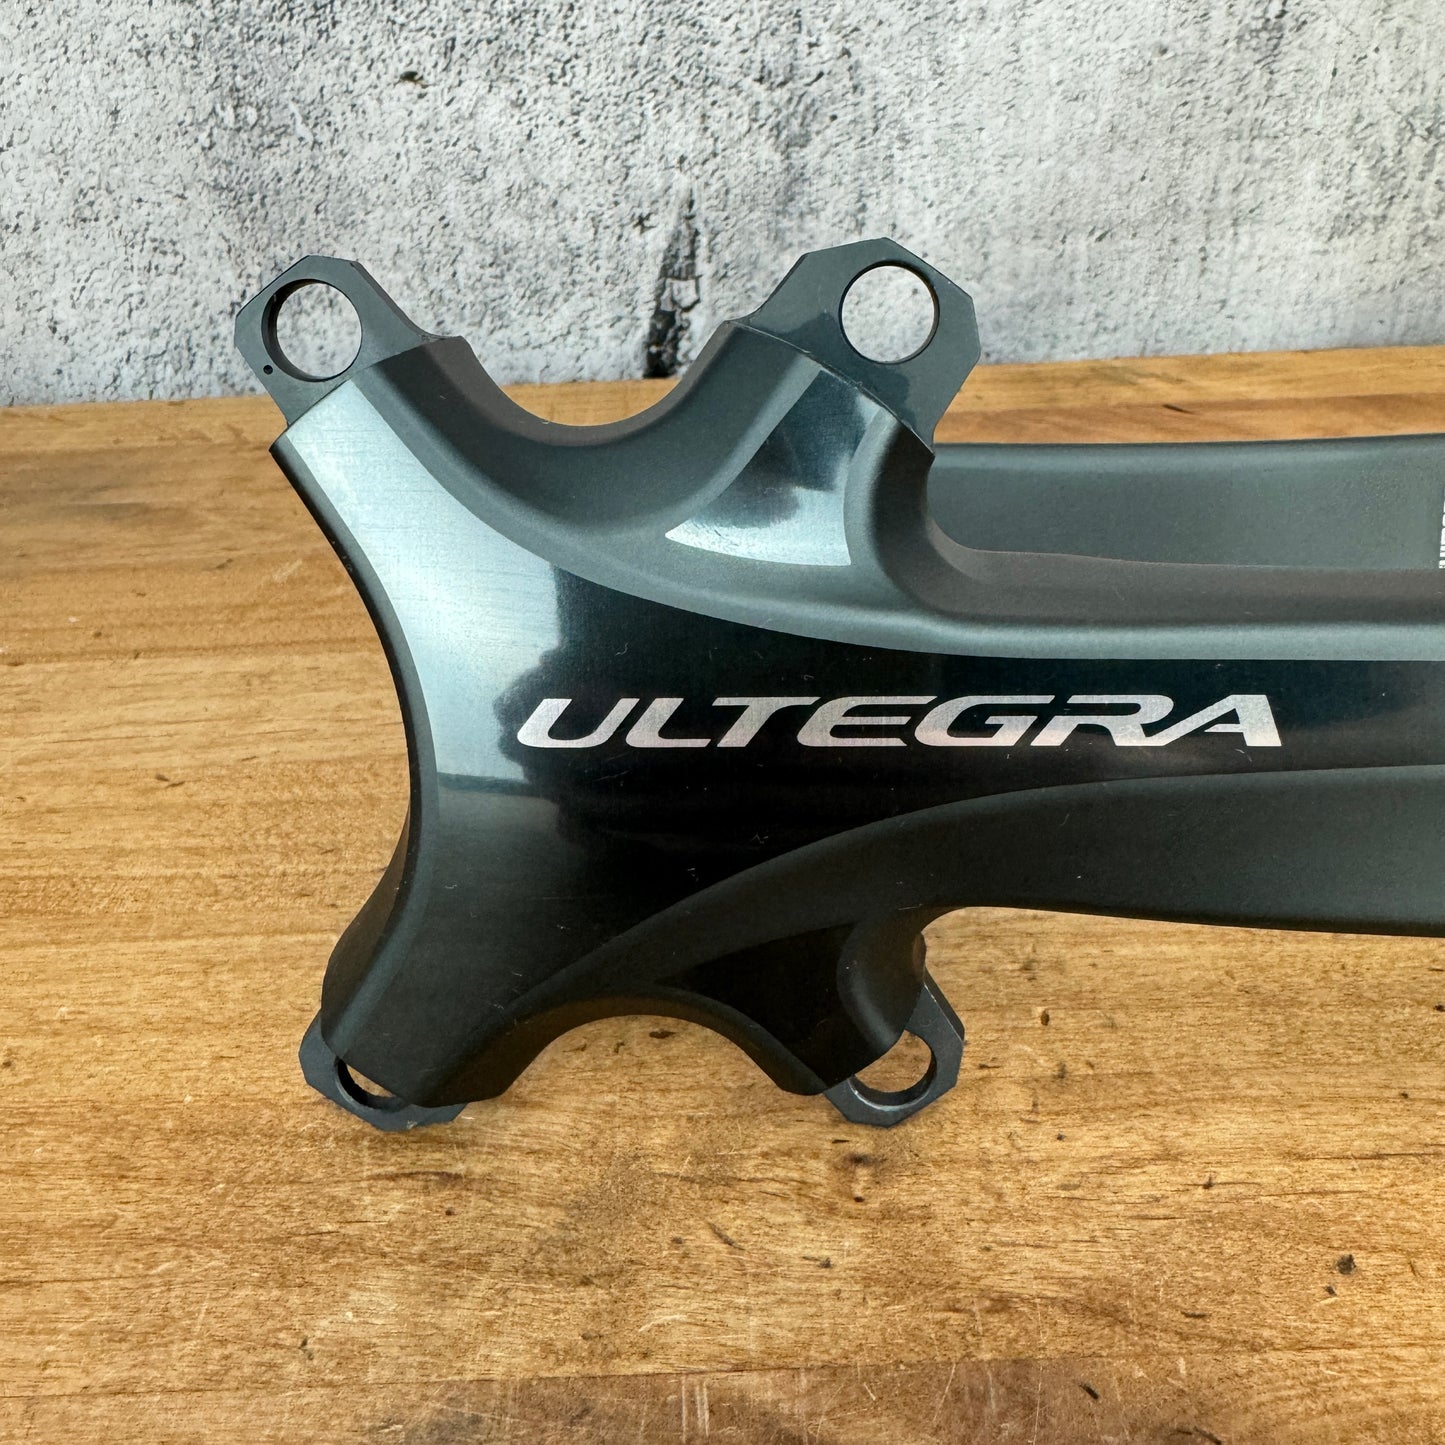 Shimano Ultegra FC-6800 175mm 4-Bolt Alloy Crank Arms 543g Passed Recall